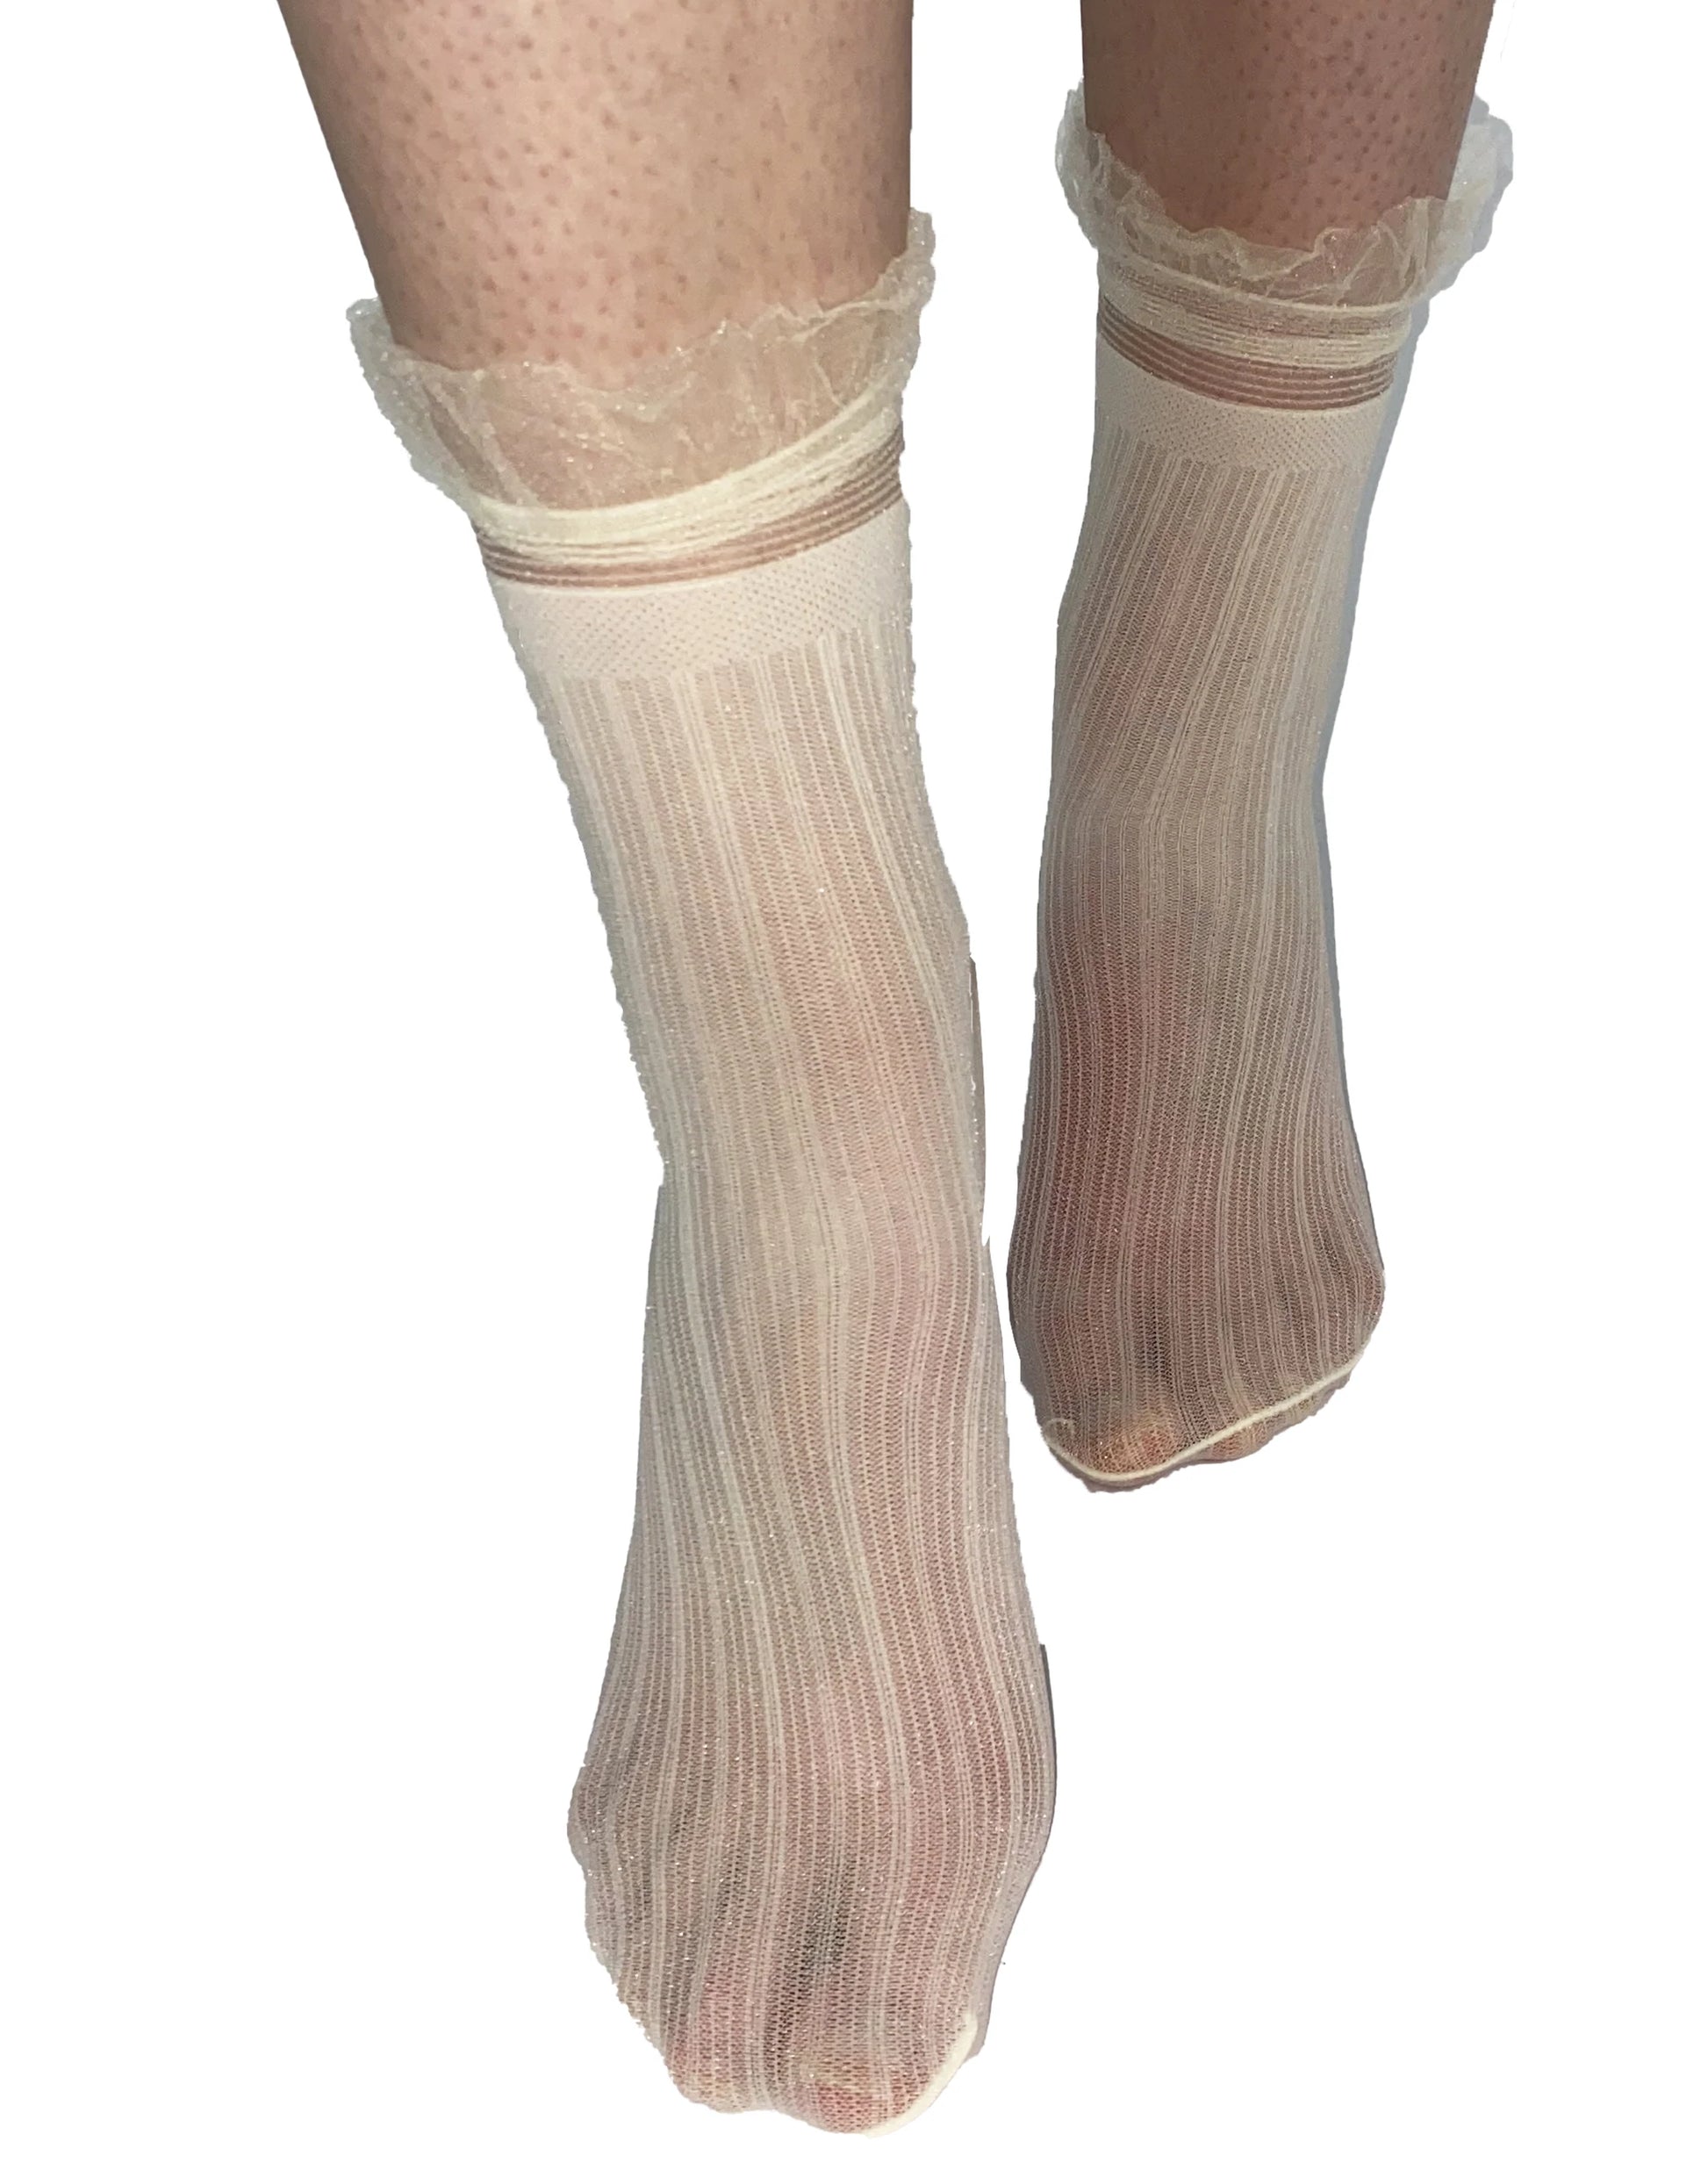 Pamela Mann Sheer Frill Ankle Socks - Sheer ivory fashion ankle socks with a stripped pattern and light frill cuff.